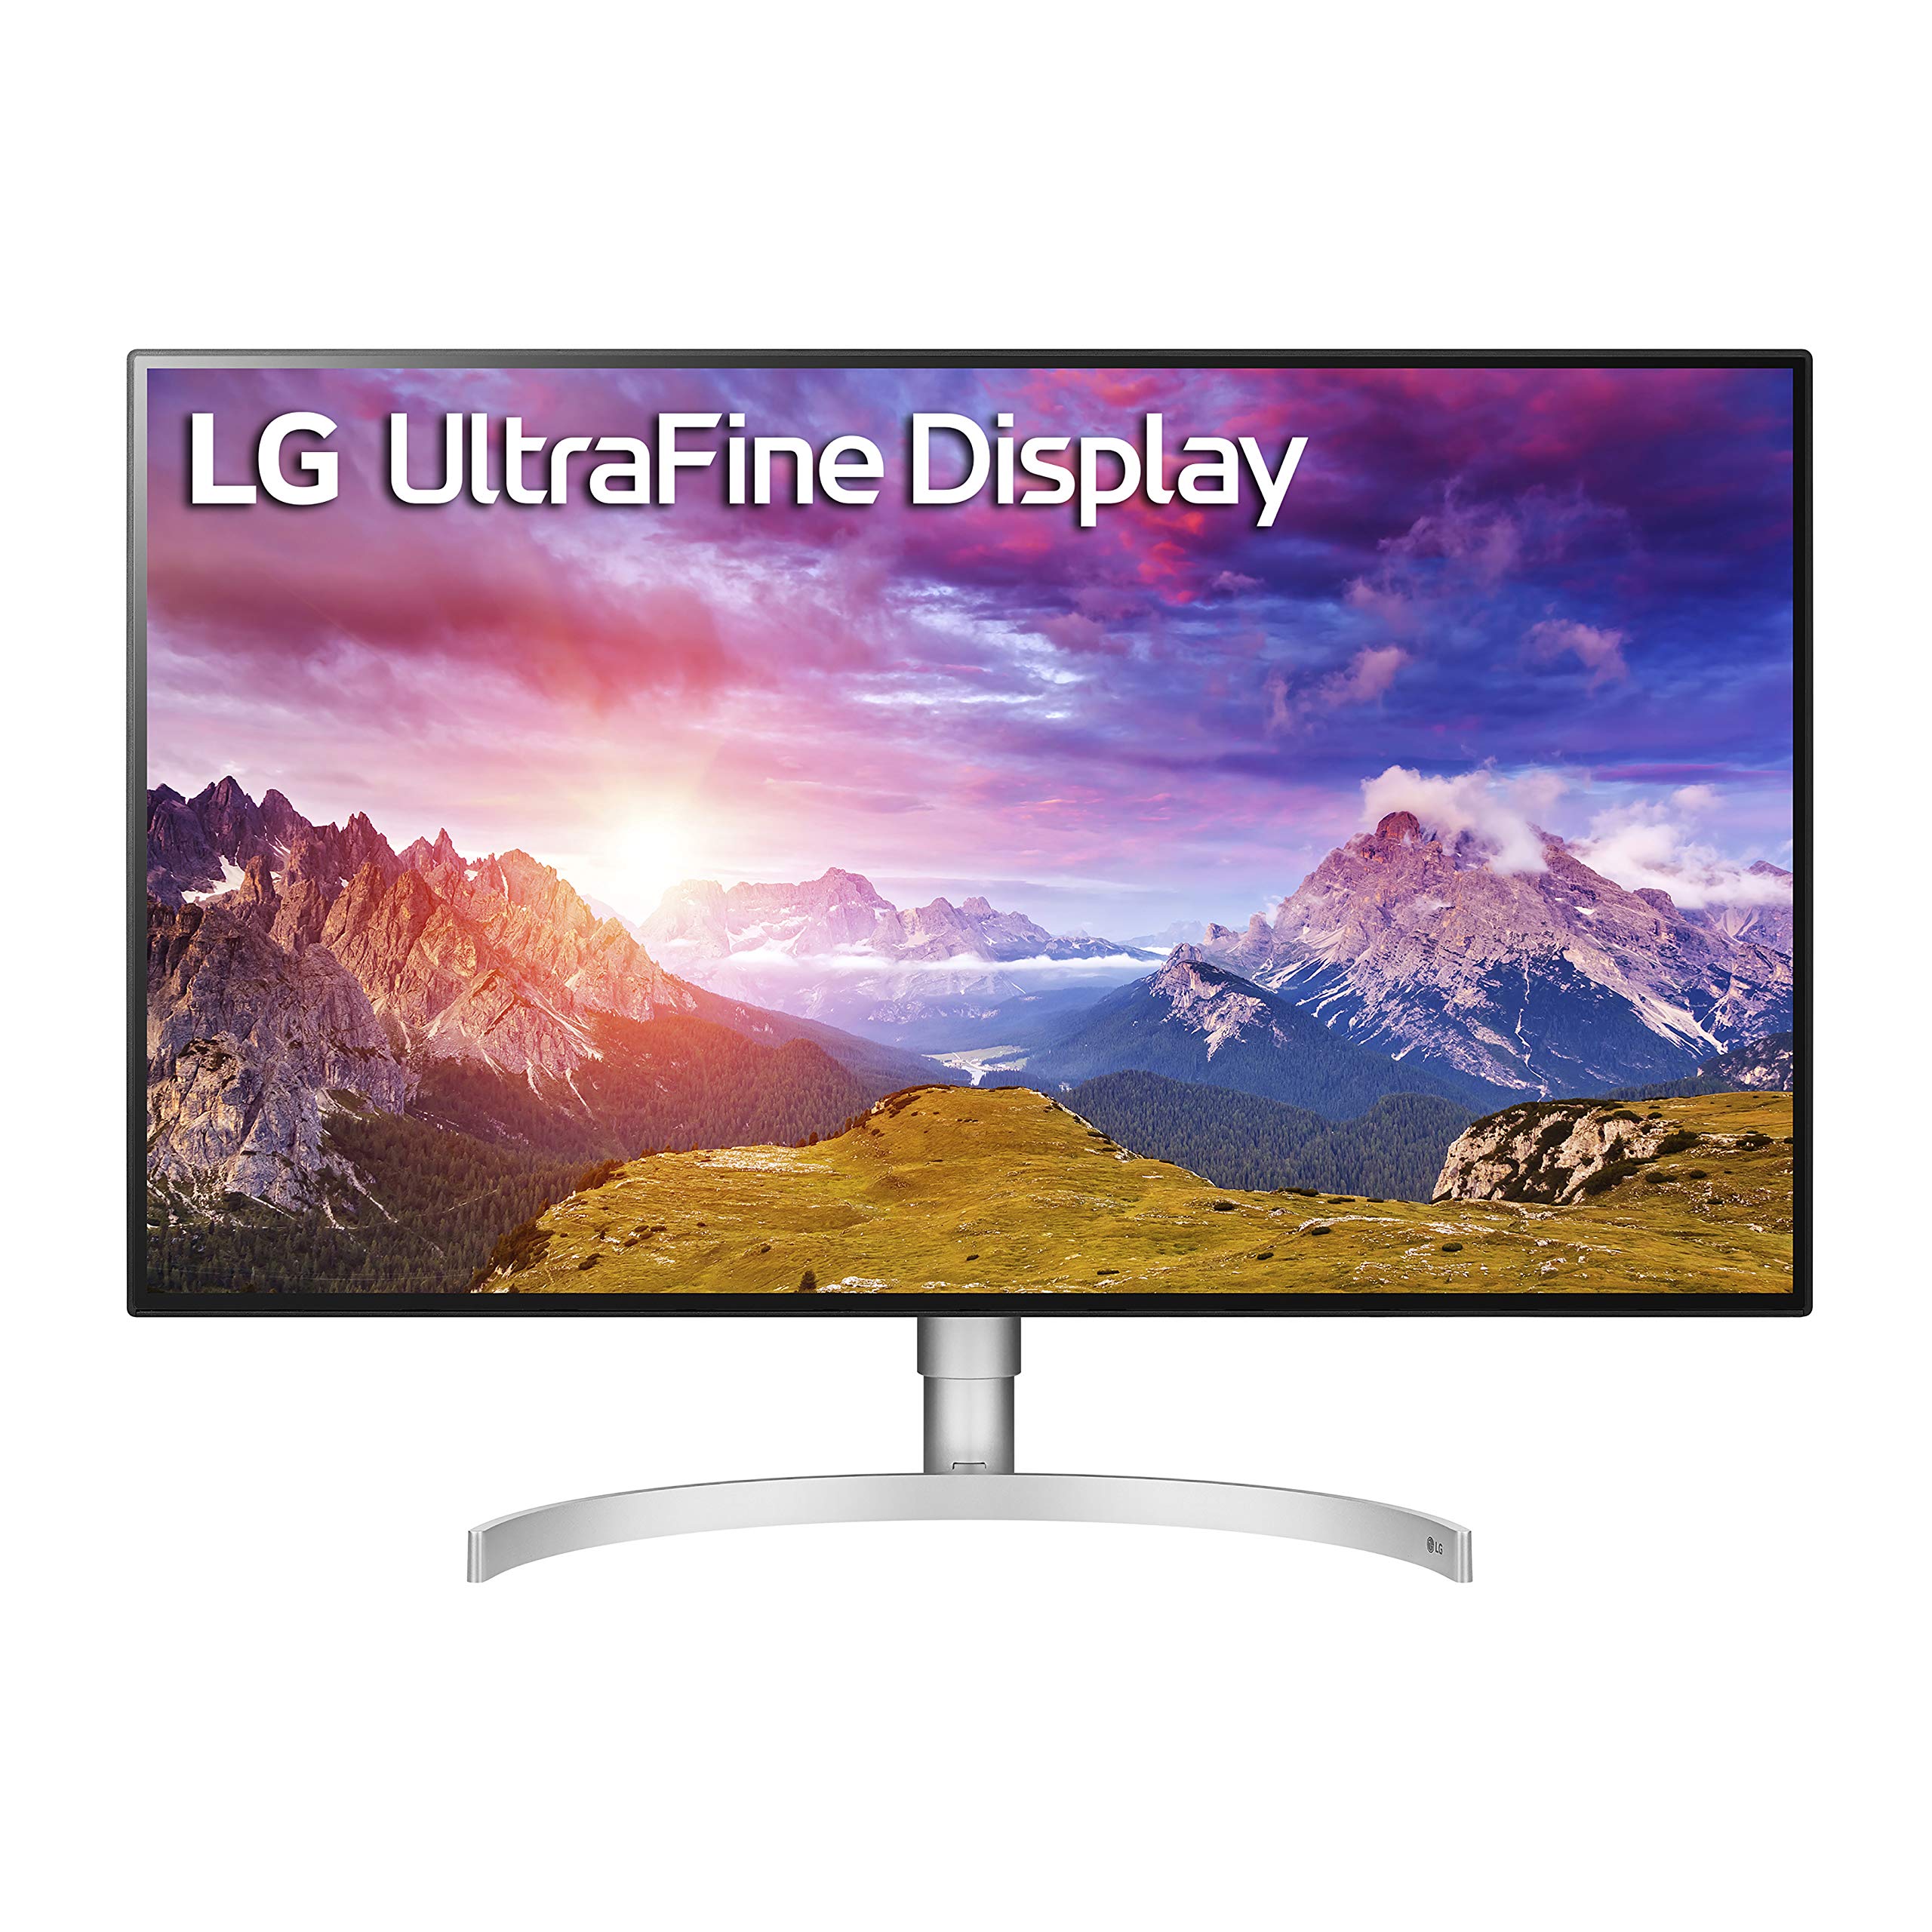 LG 32UL950-W 32' Class Ultrafine 4K UHD LED Monitor with Thunderbolt 3 Connectivity Silver (31.5' Display)